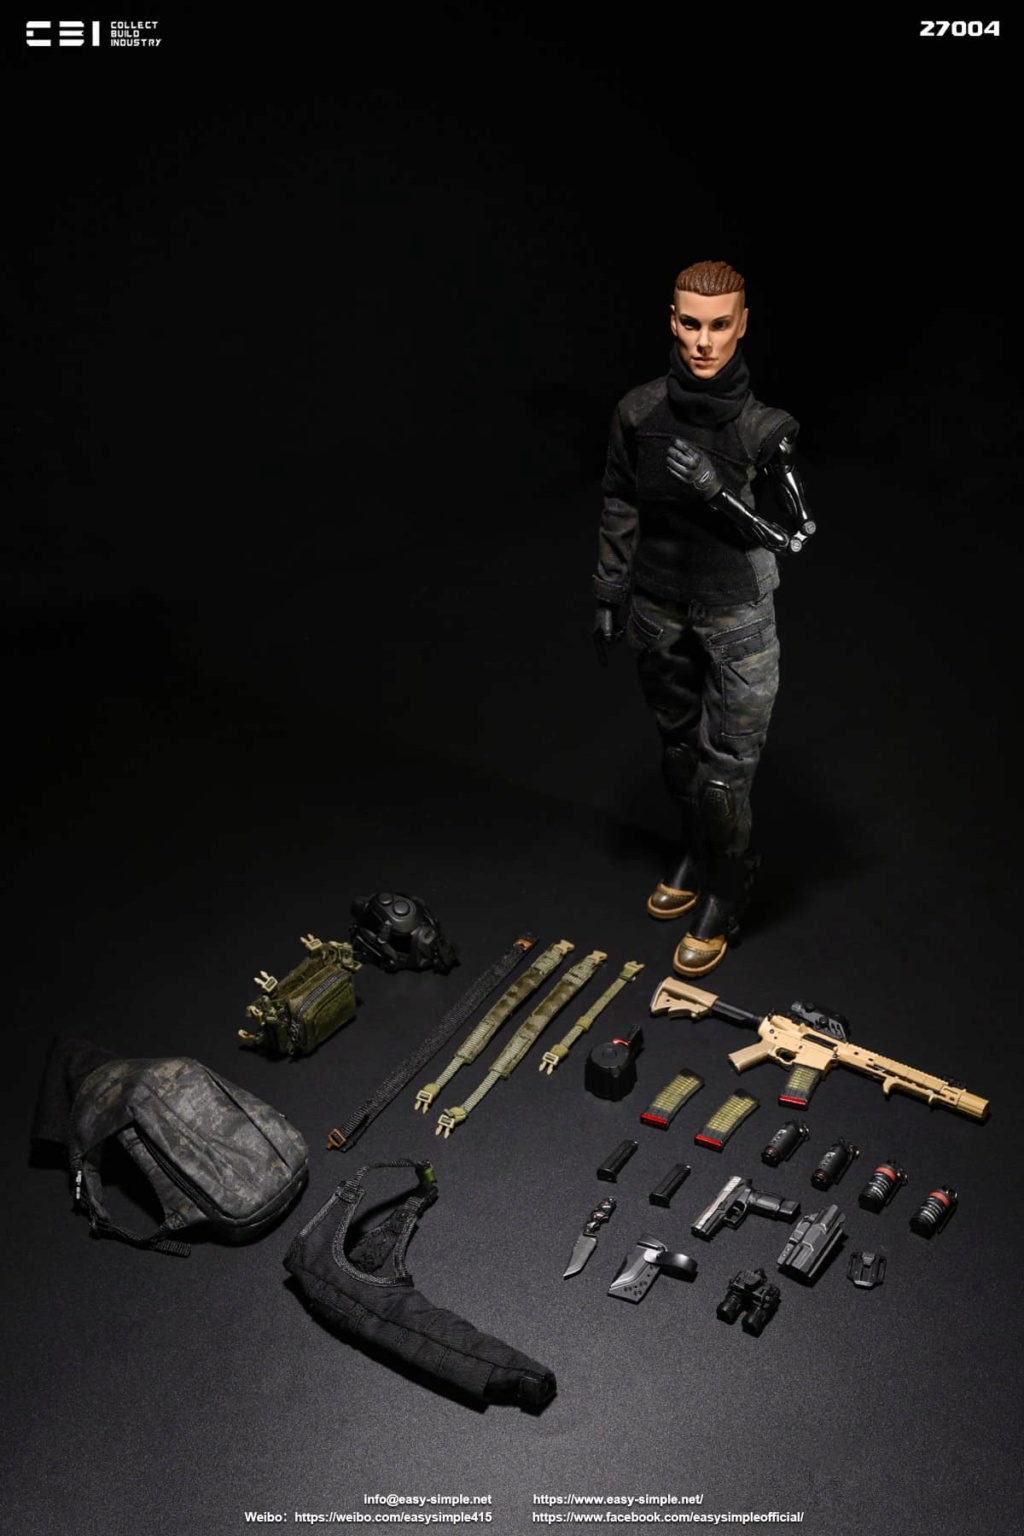 NEW PRODUCT: CBI & Easy&Simple: 27004 1/6 ERICA STORM - TASK FORCE 58 CPO action figure 5649